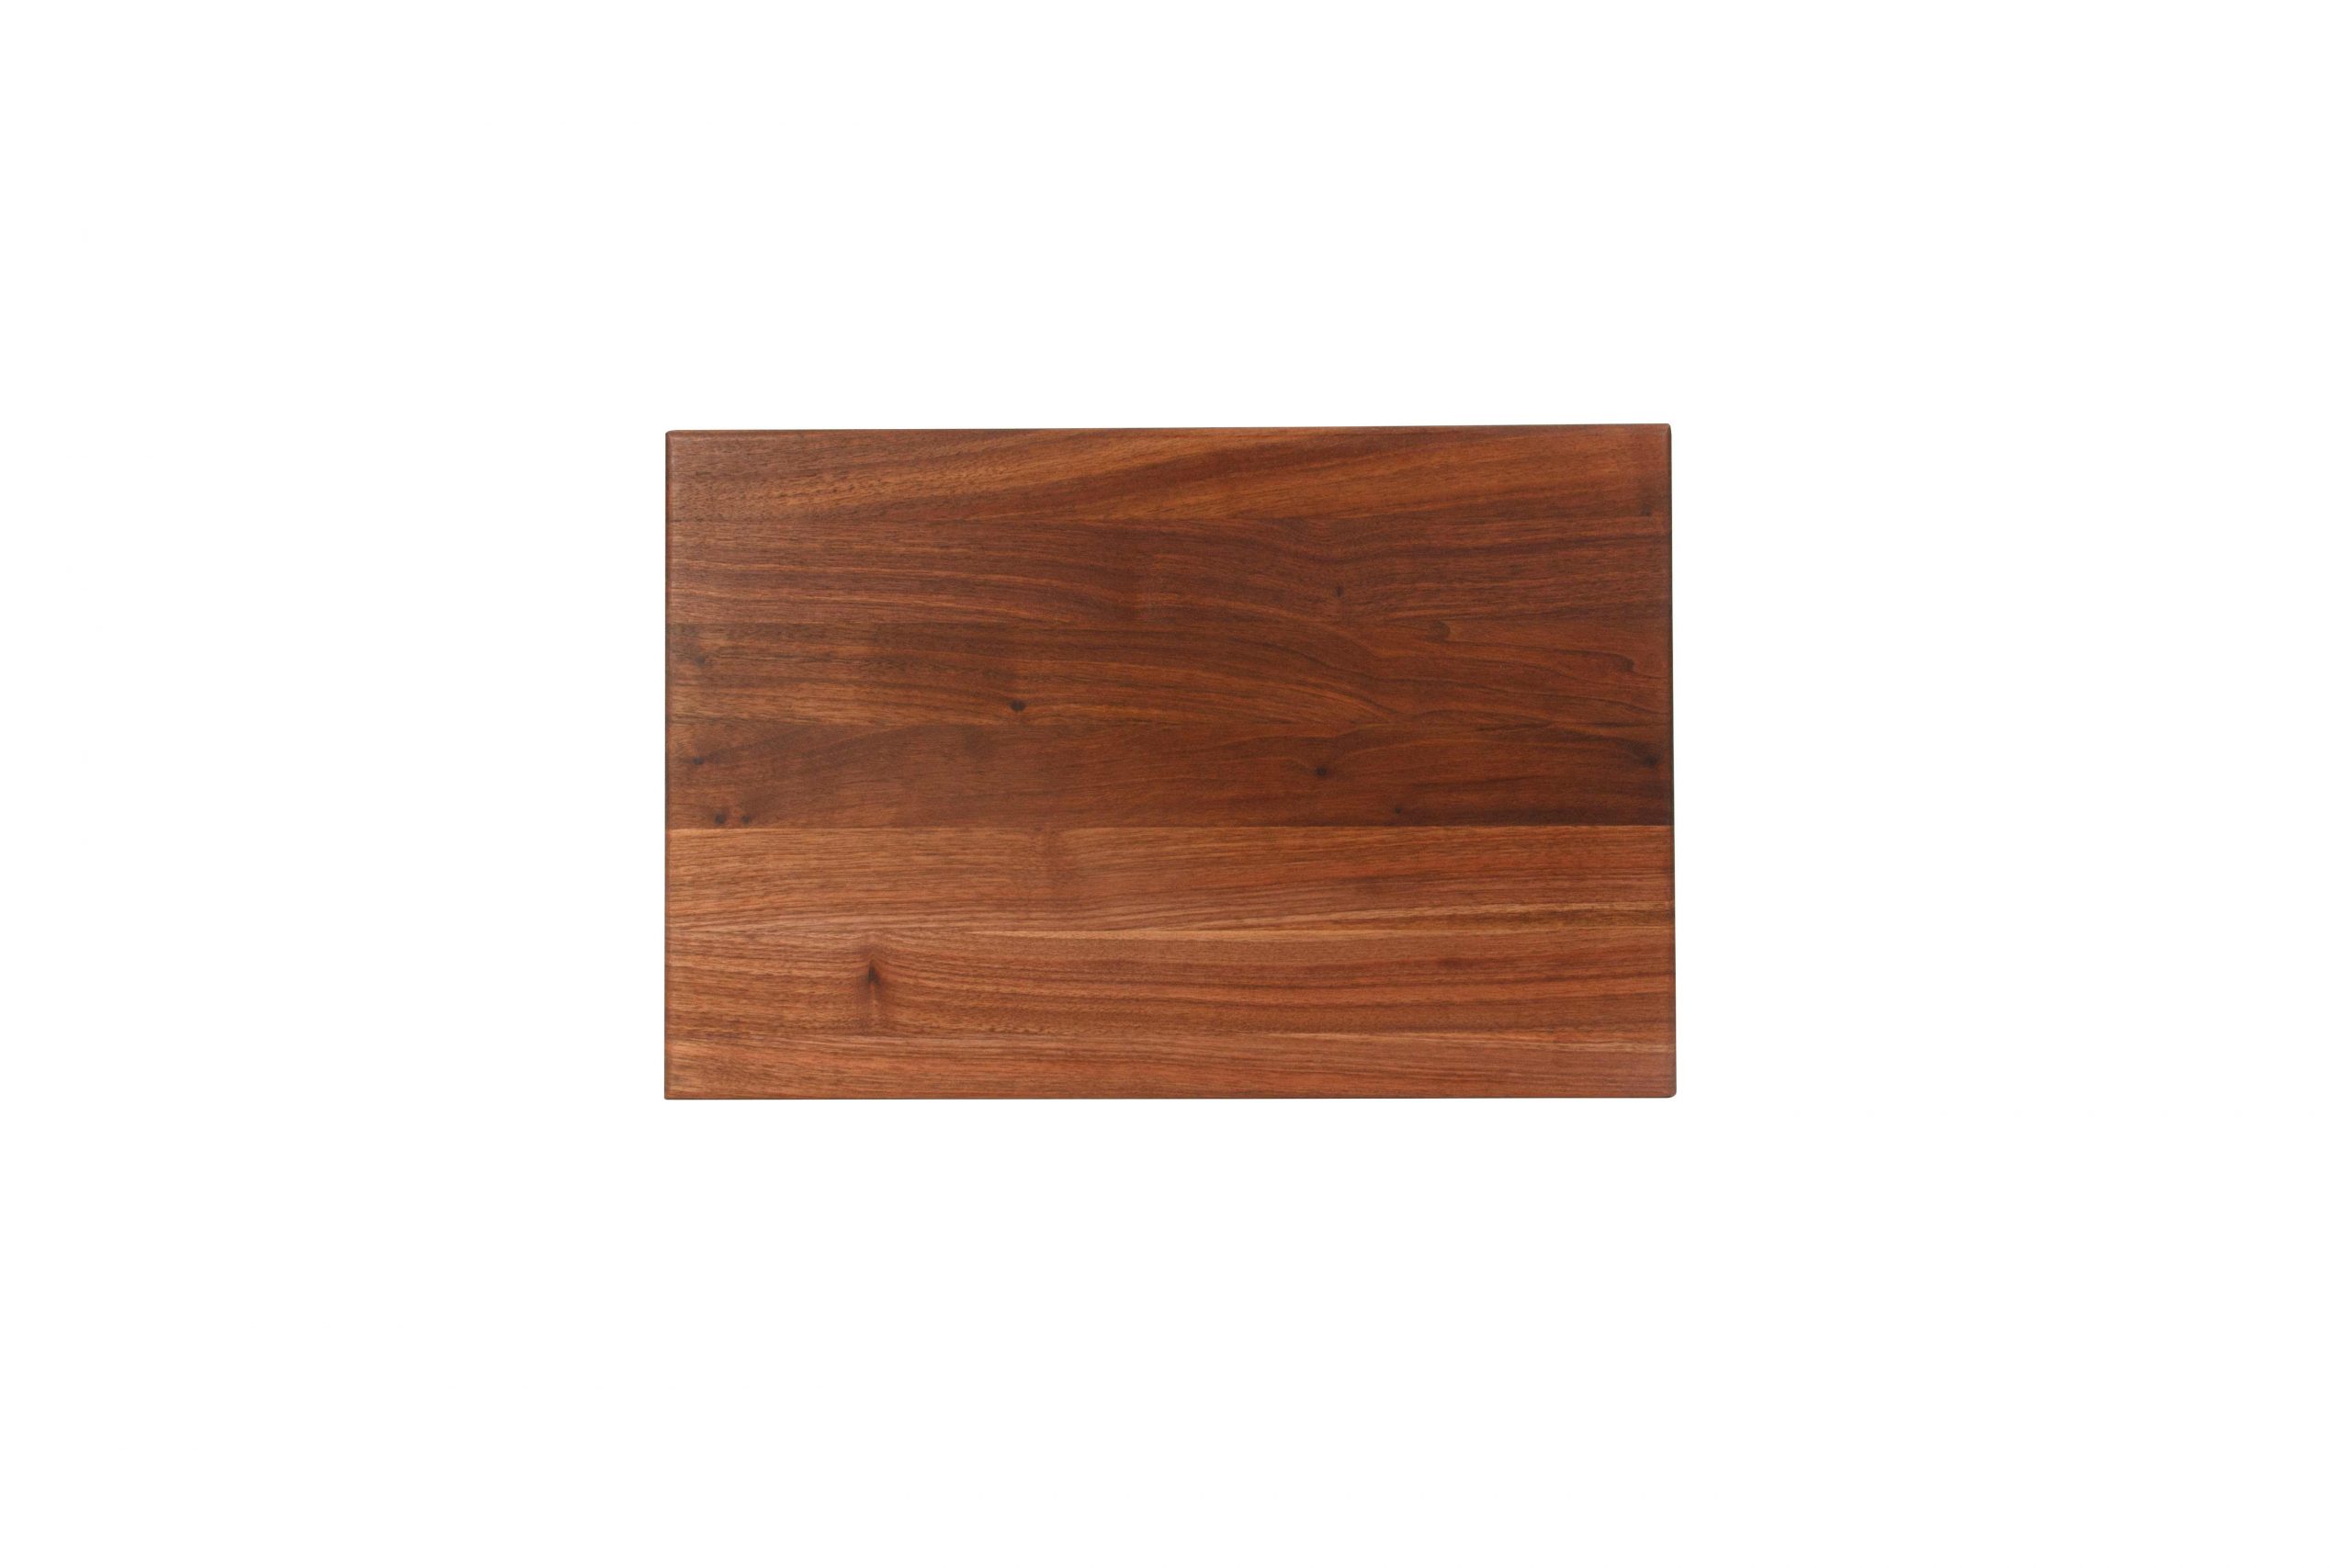 Pro Chef Black Walnut cutting board with recessed handles; can be used on both sides 21